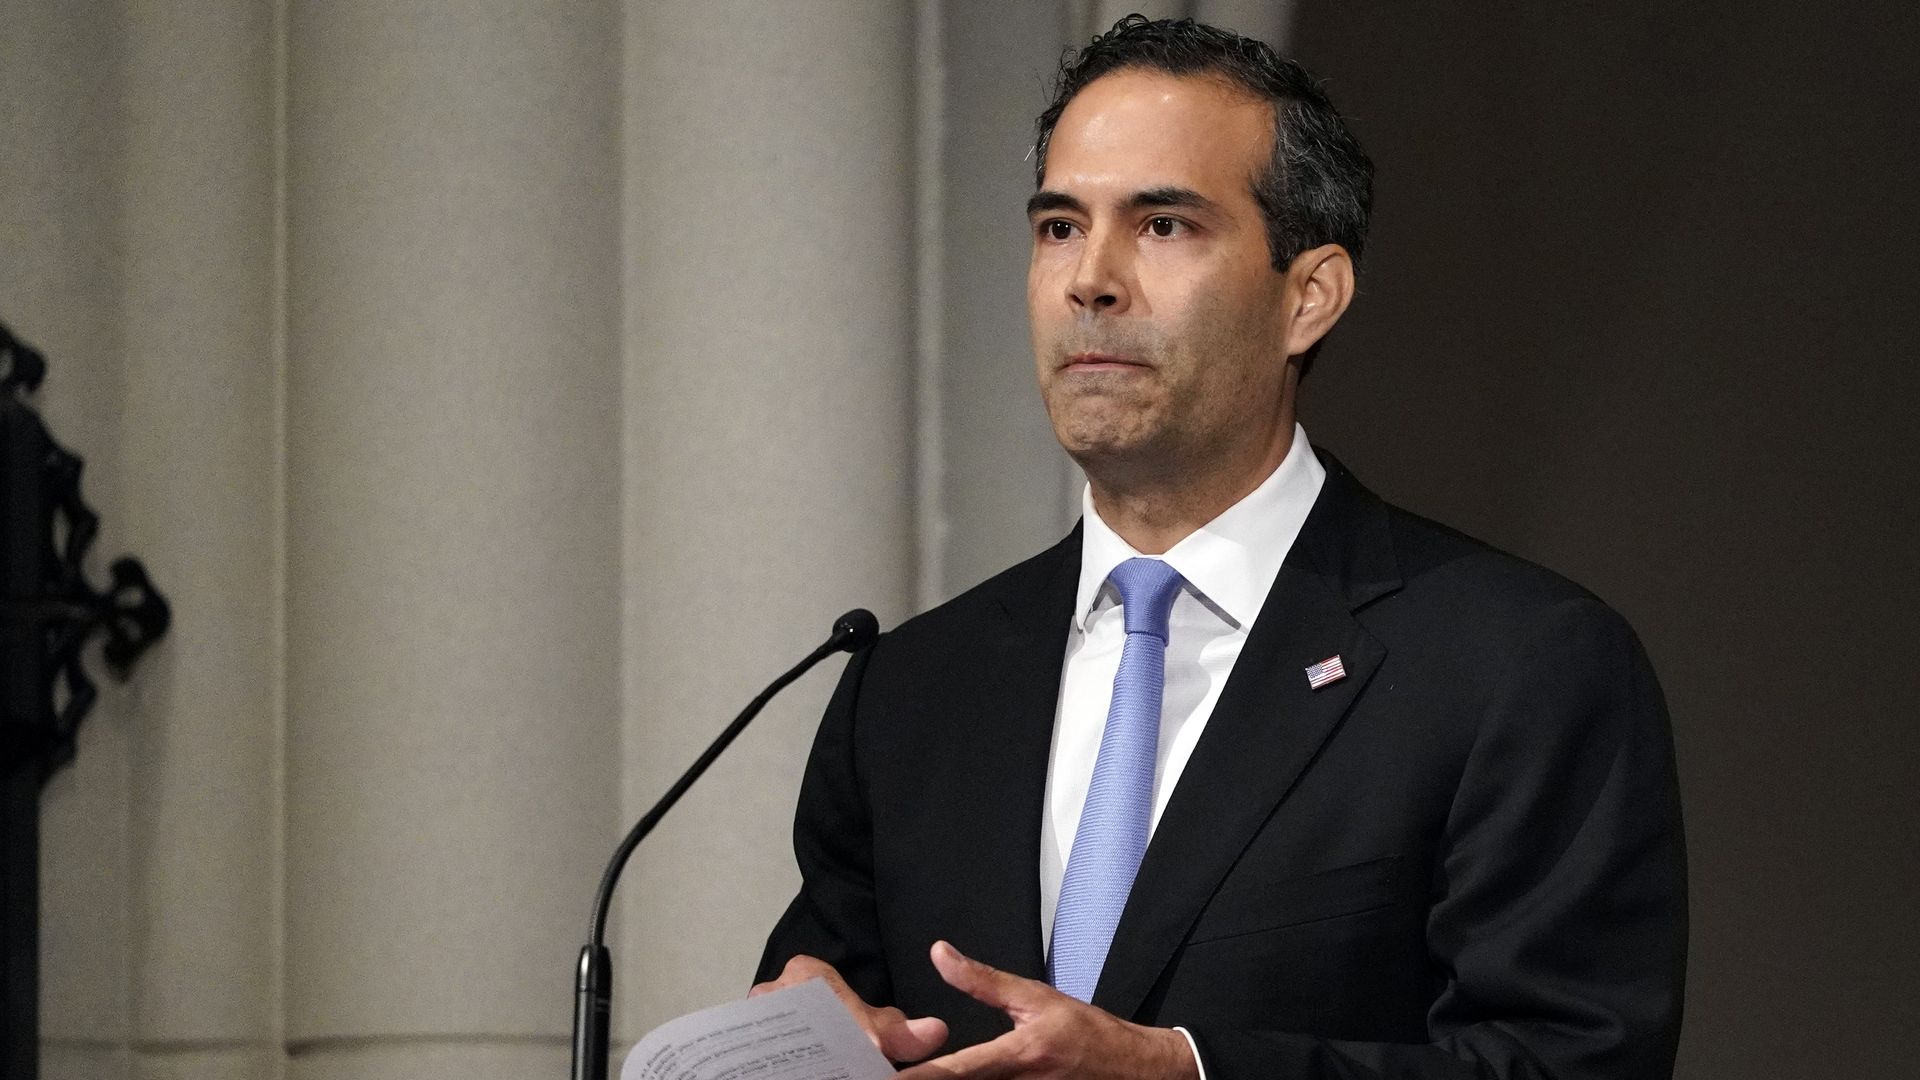 George P. Bush pauses as he gives a eulogy during the funeral for former President George H.W. Bush at St. Martin's Episcopal Church, on December 6, 2018 in Houston, Texas. 